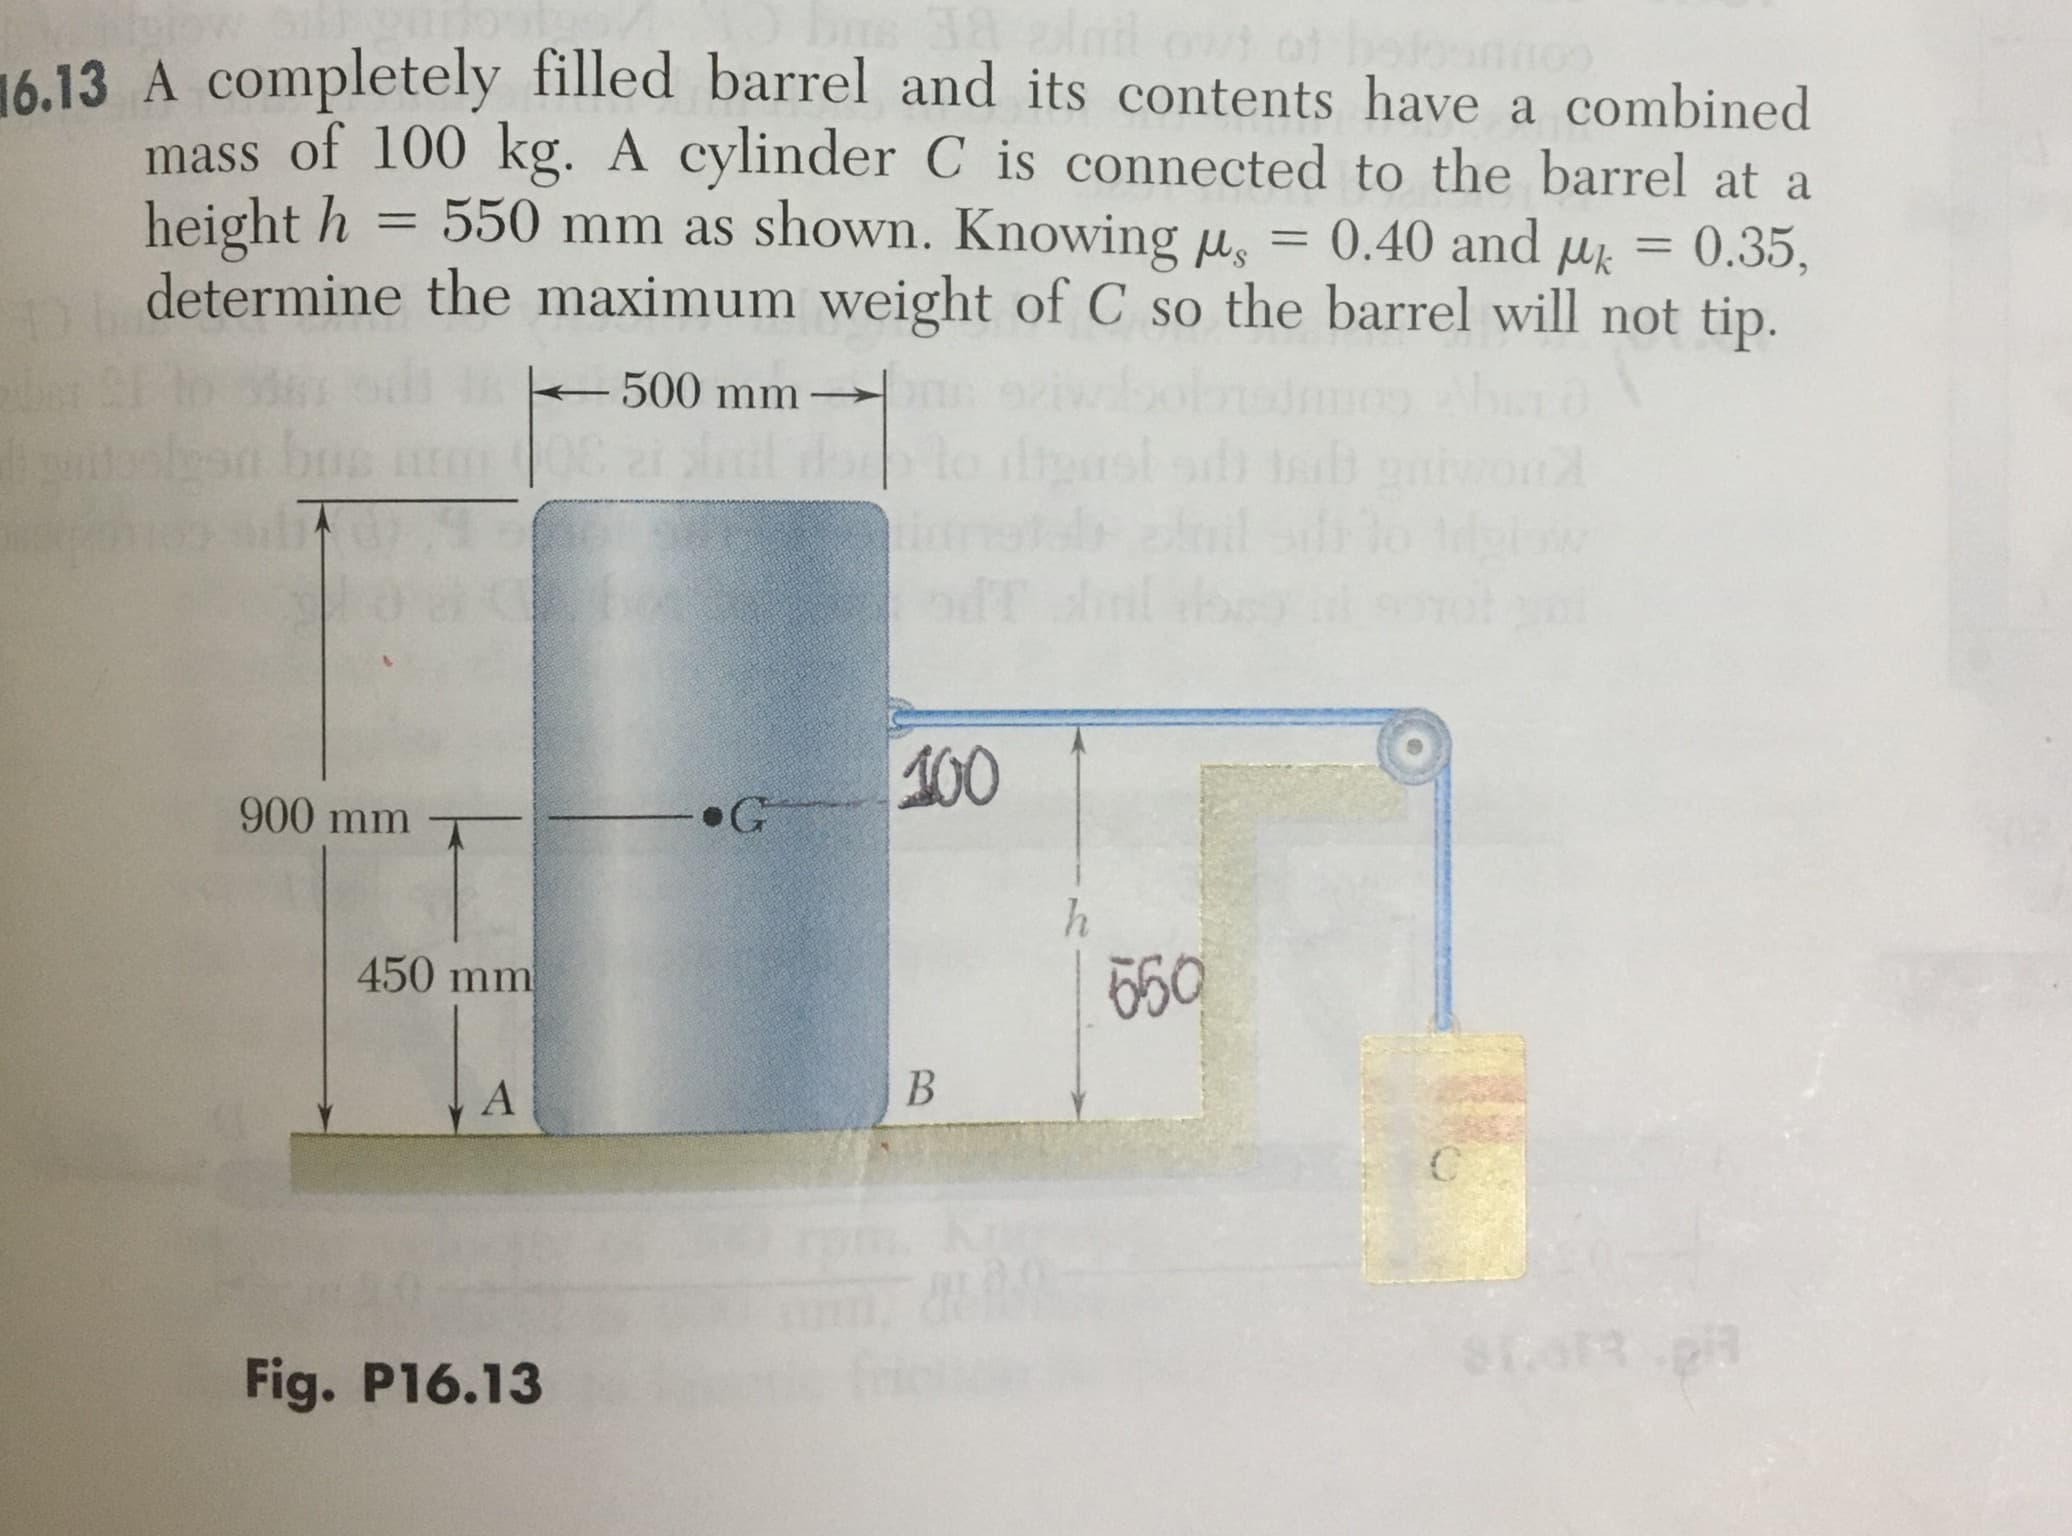 A completely filled barrel and its contents have a combined
mass of 100 kg. A cylinder C is connected to the barrel at a
height h
550 mm as shown. Knowing u,
0.40 and uk
0.35,
determine the maximum weight of C so the barrel will not tip.
-500 mm
100
900 mm
G
450 mm
